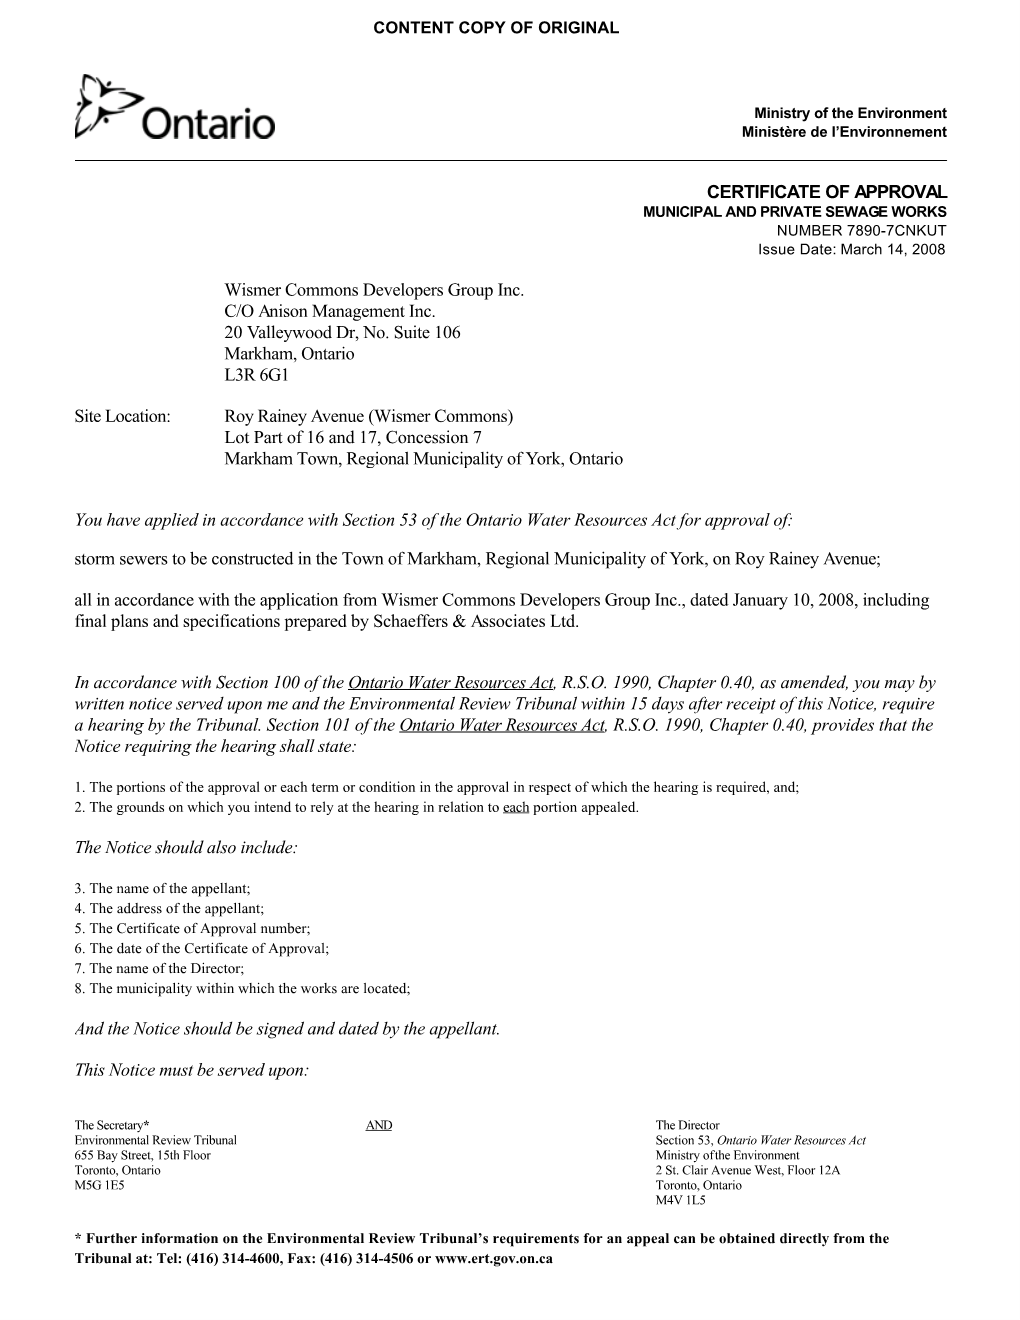 CERTIFICATE of APPROVAL Wismer Commons Developers Group Inc